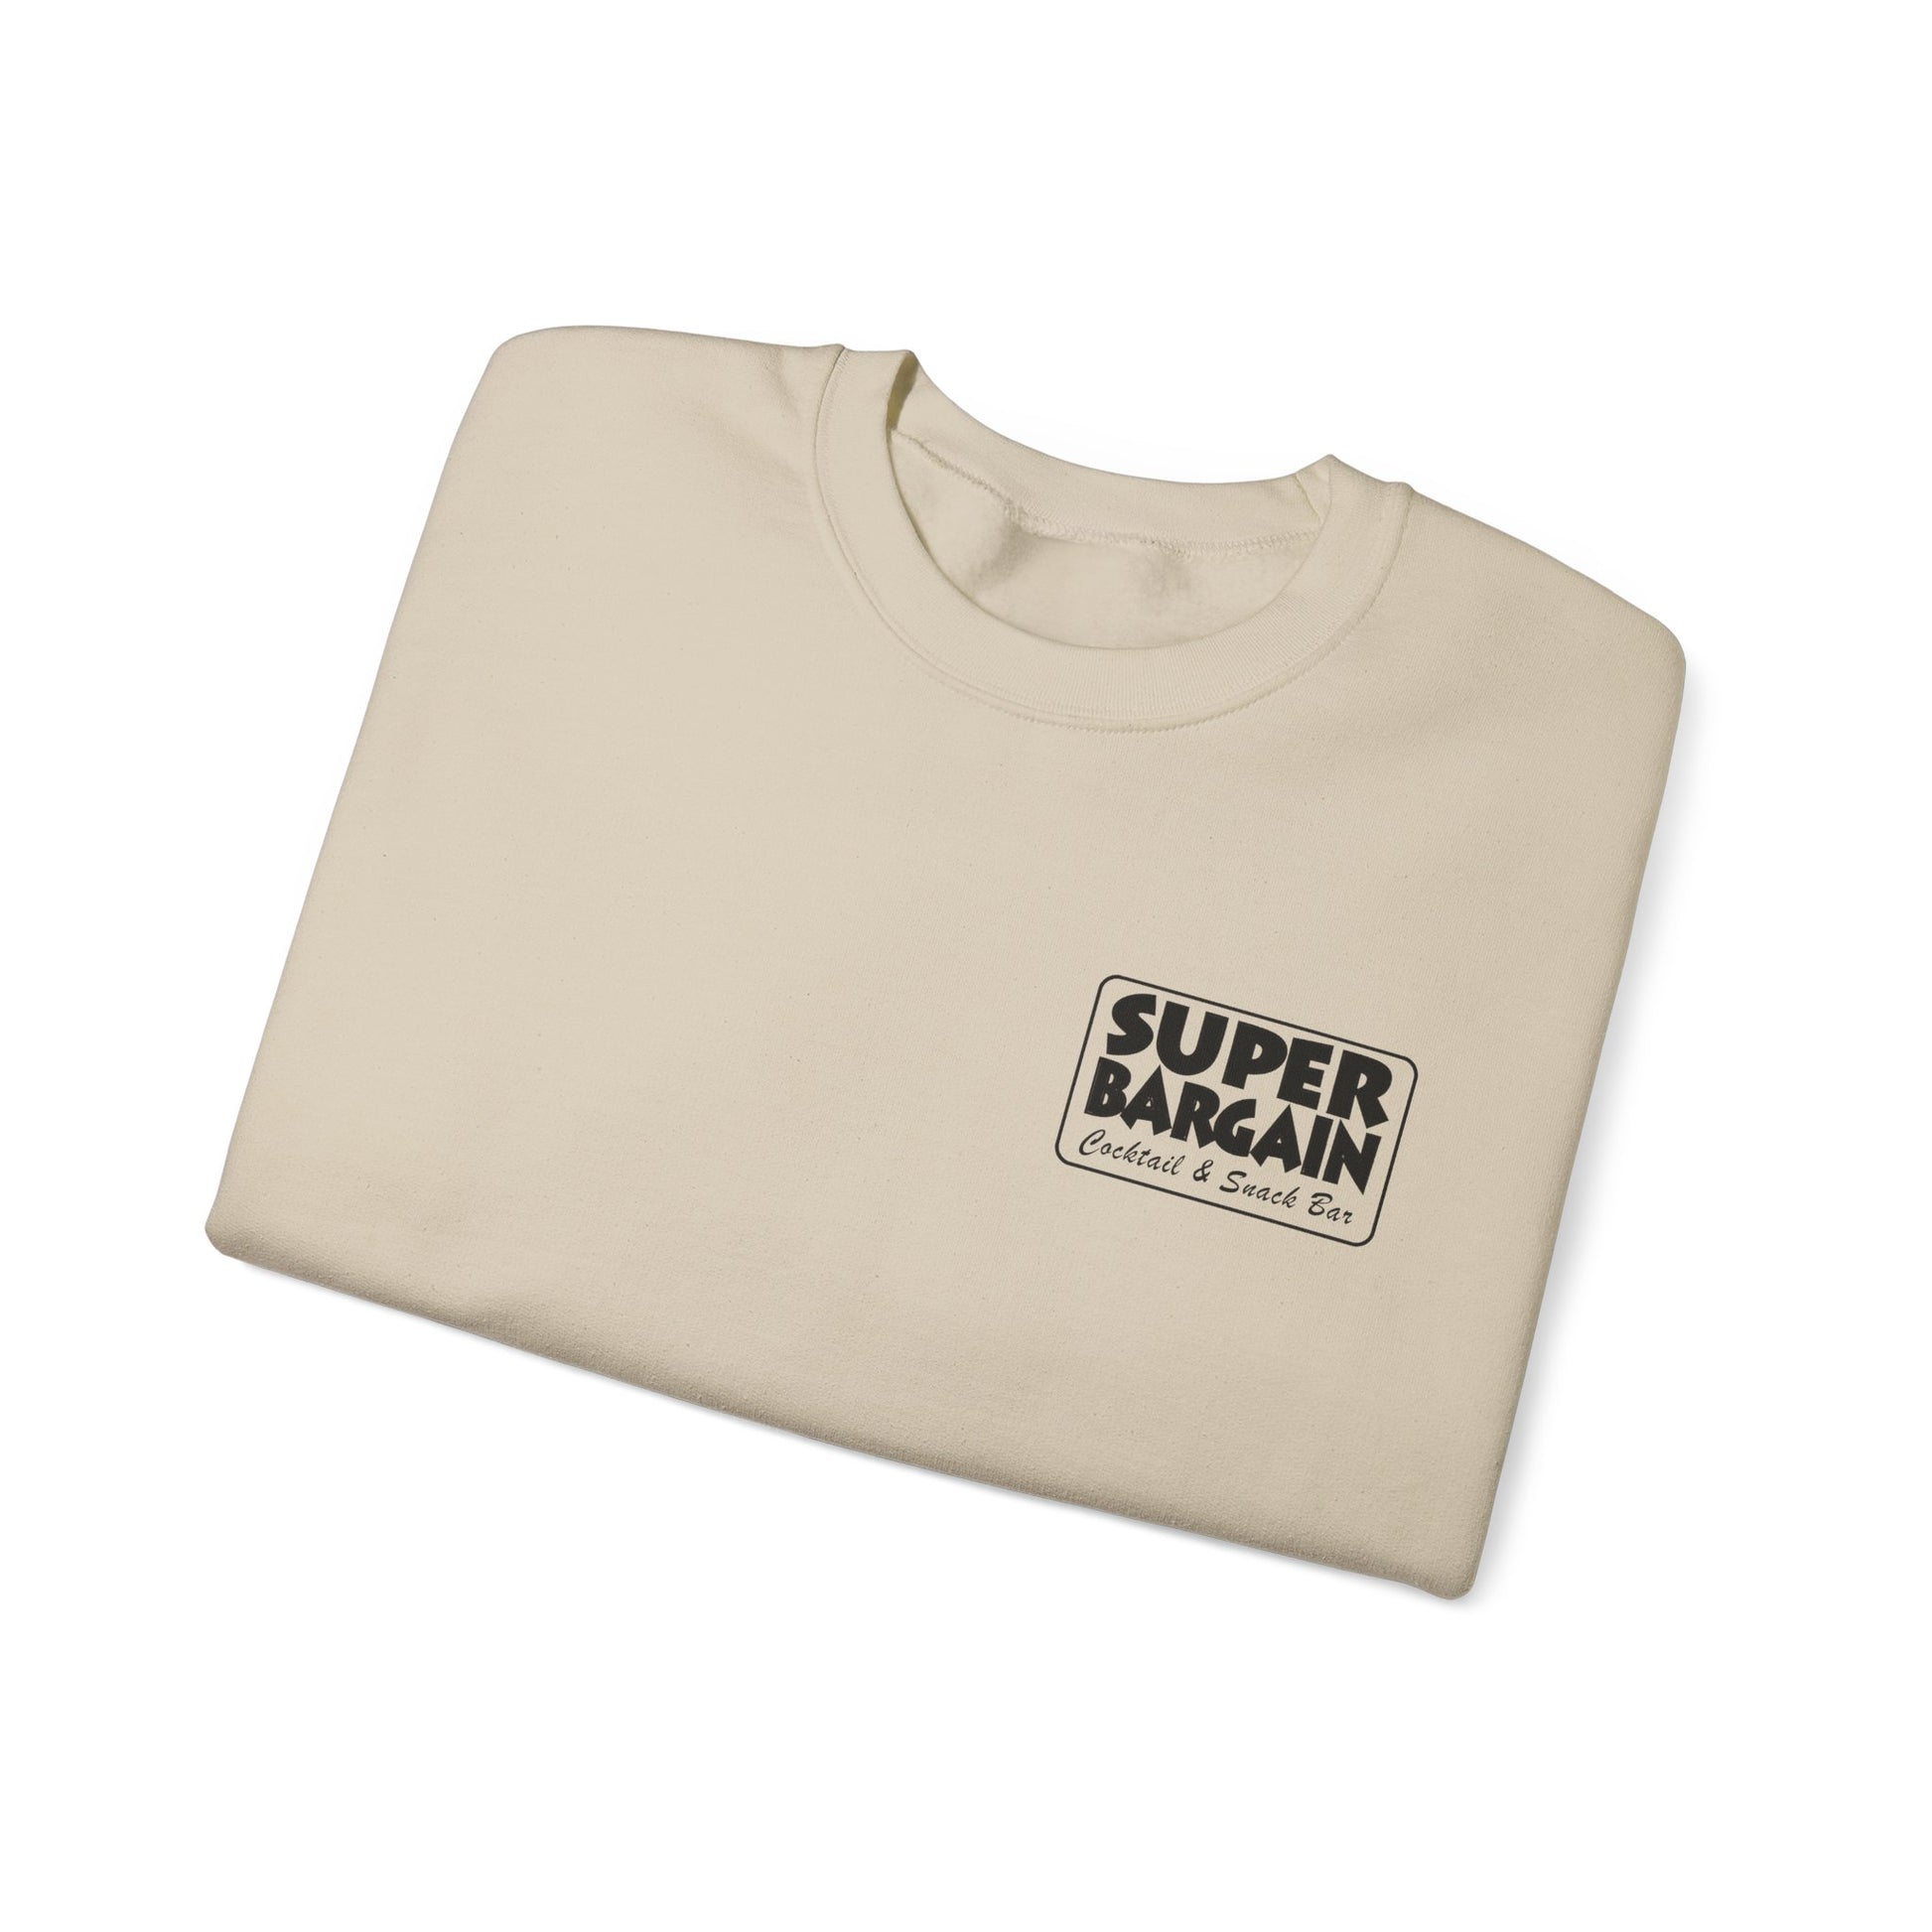 A folded beige Unisex Heavy Blend™ Crewneck Monochrome Logo Sweatshirt with a black "Super Bargain - Great & Small" logo on the left chest area, isolated on a white background, featuring "Toronto" below the main logo.